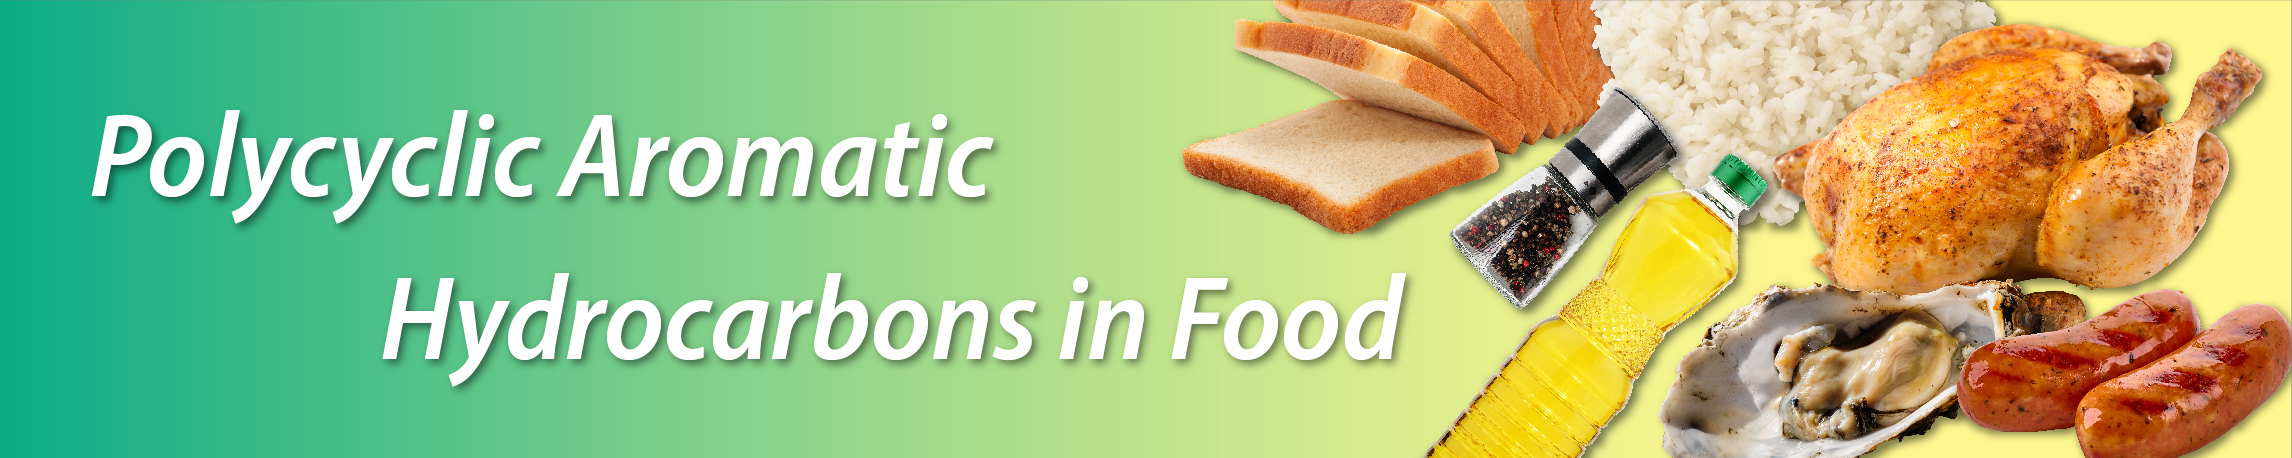 Polycyclic Aromatic Hydrocarbons in Food